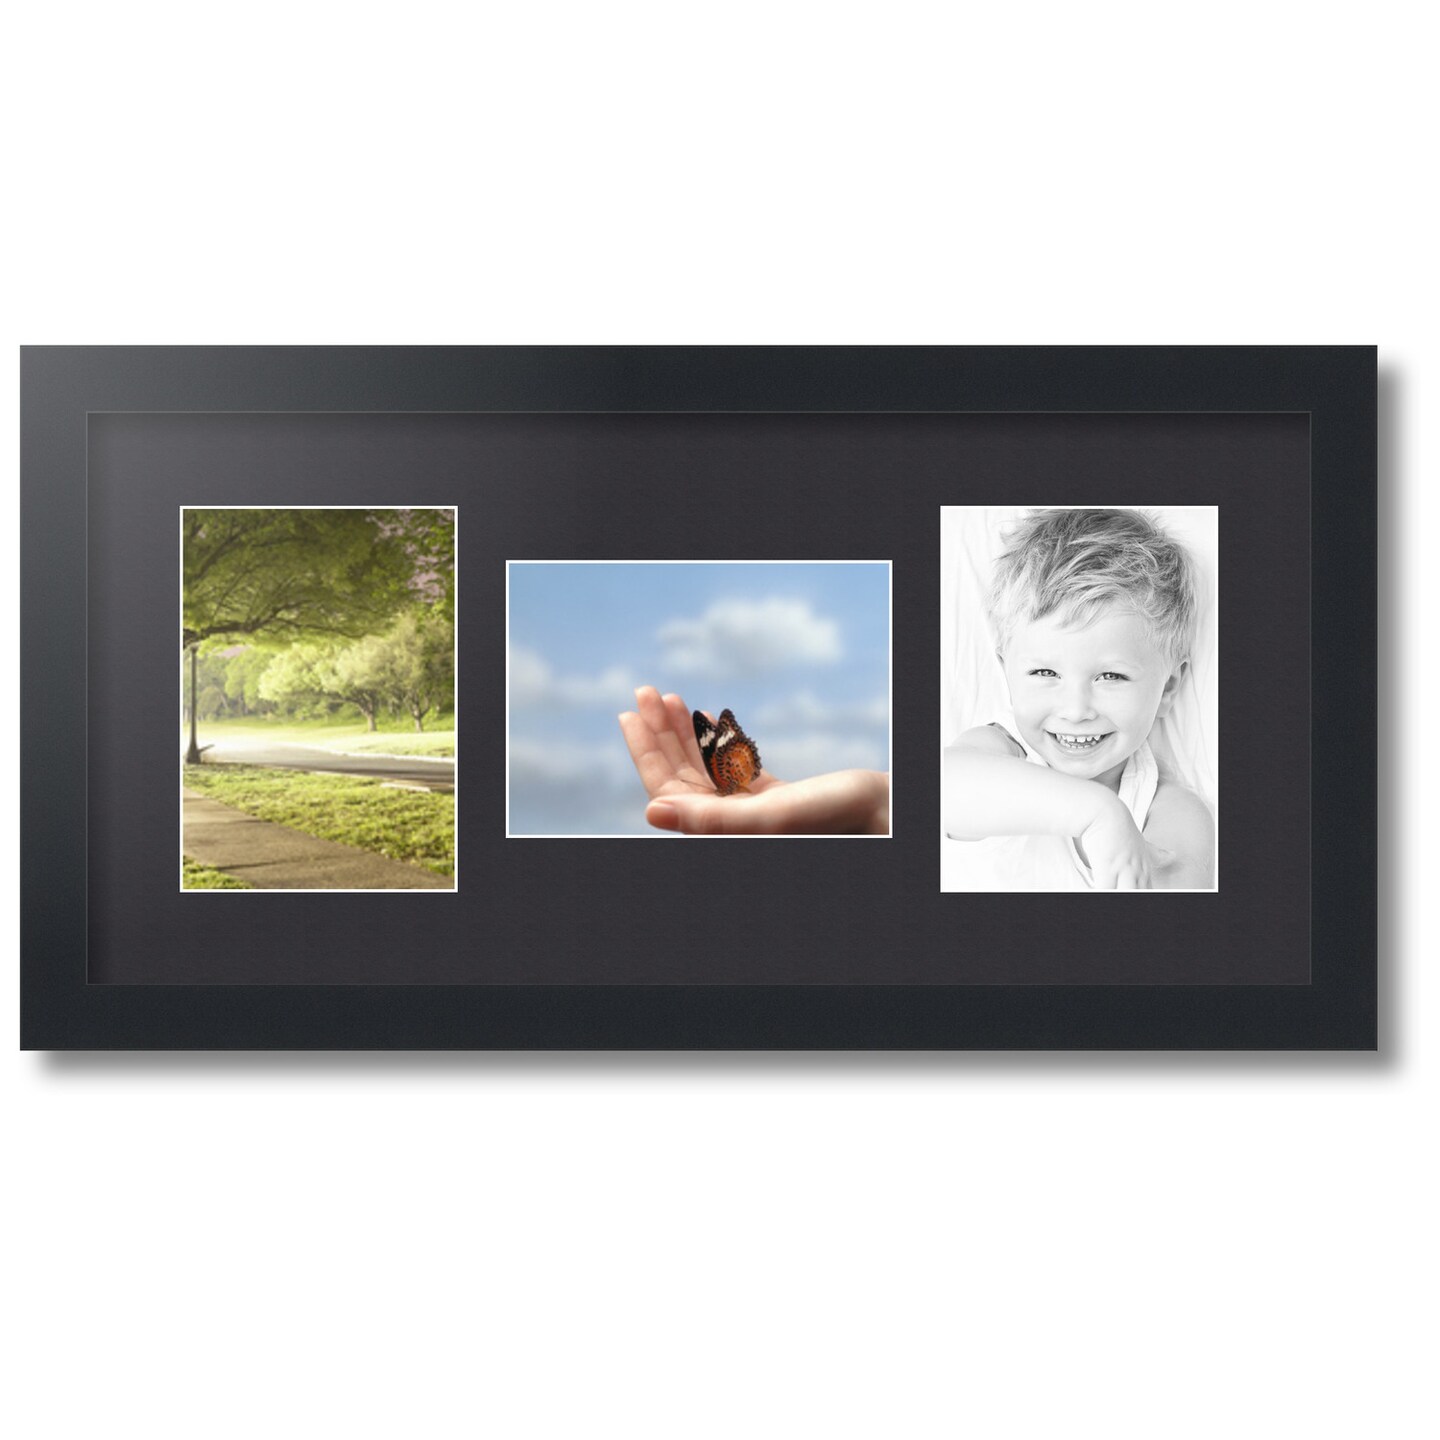 ArtToFrames Collage Photo Picture Frame with 3 - 5x7 inch Openings, Framed in Black with Over 62 Mat Color Options and Plexi Glass (CSM-3926-114)